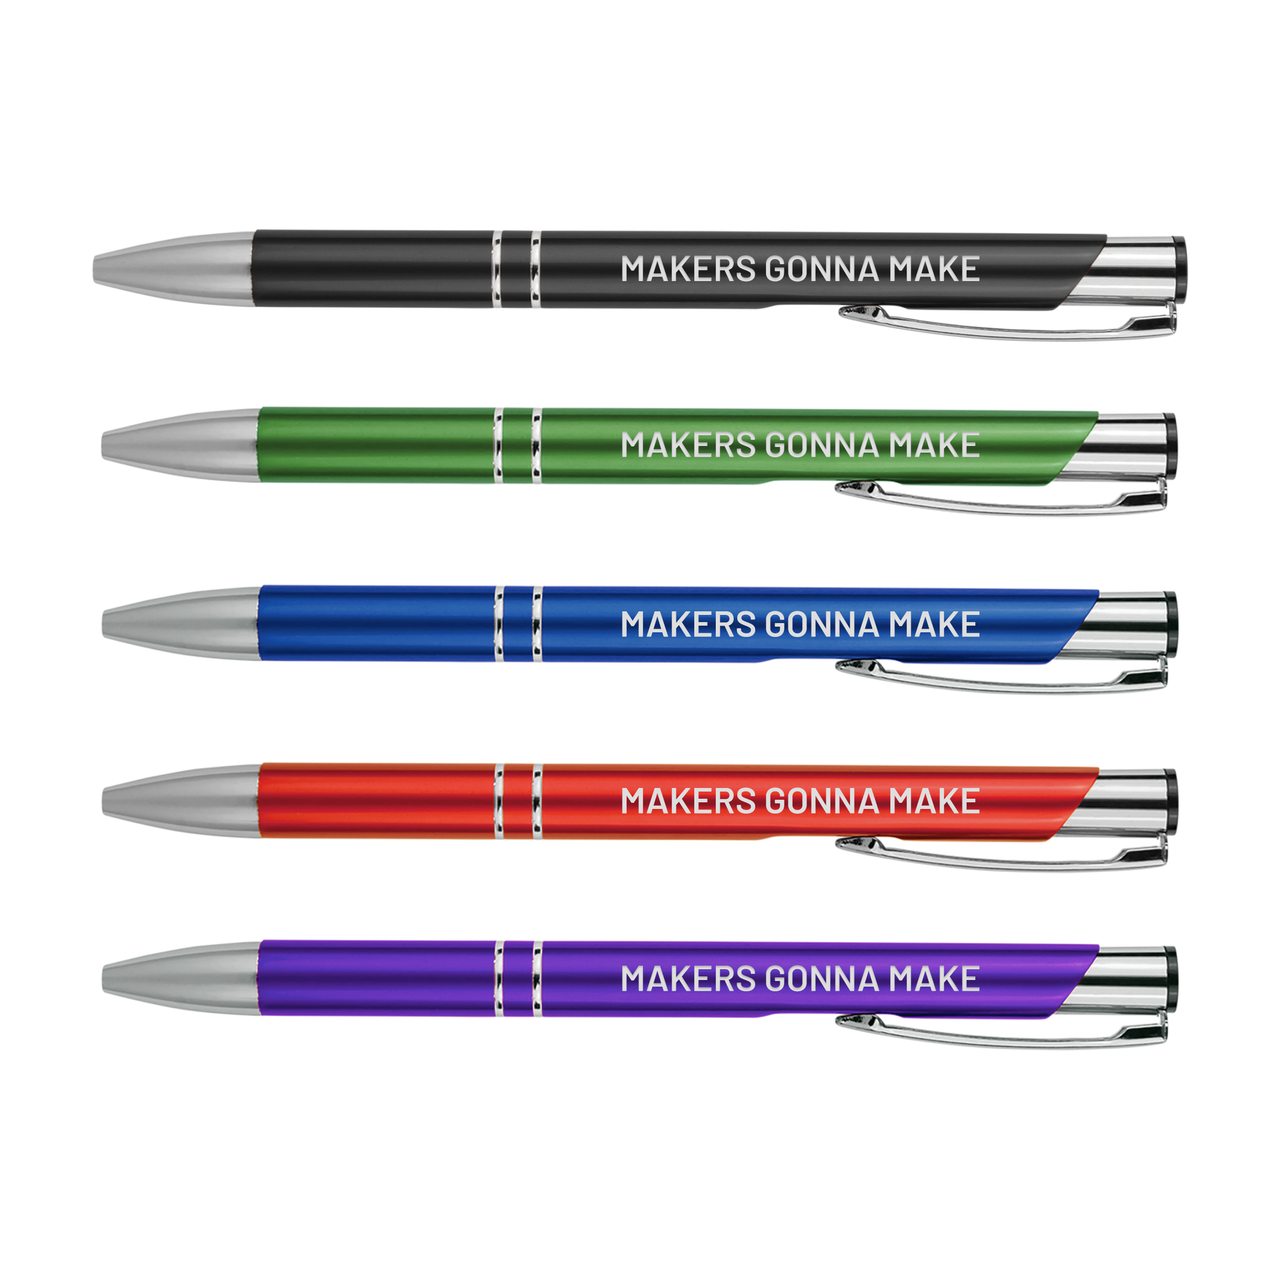 Makers Gonna Make Metal Pens | Motivational Writing Tools Office Supplies Coworker Gifts Stocking Stuffer Baum Designs